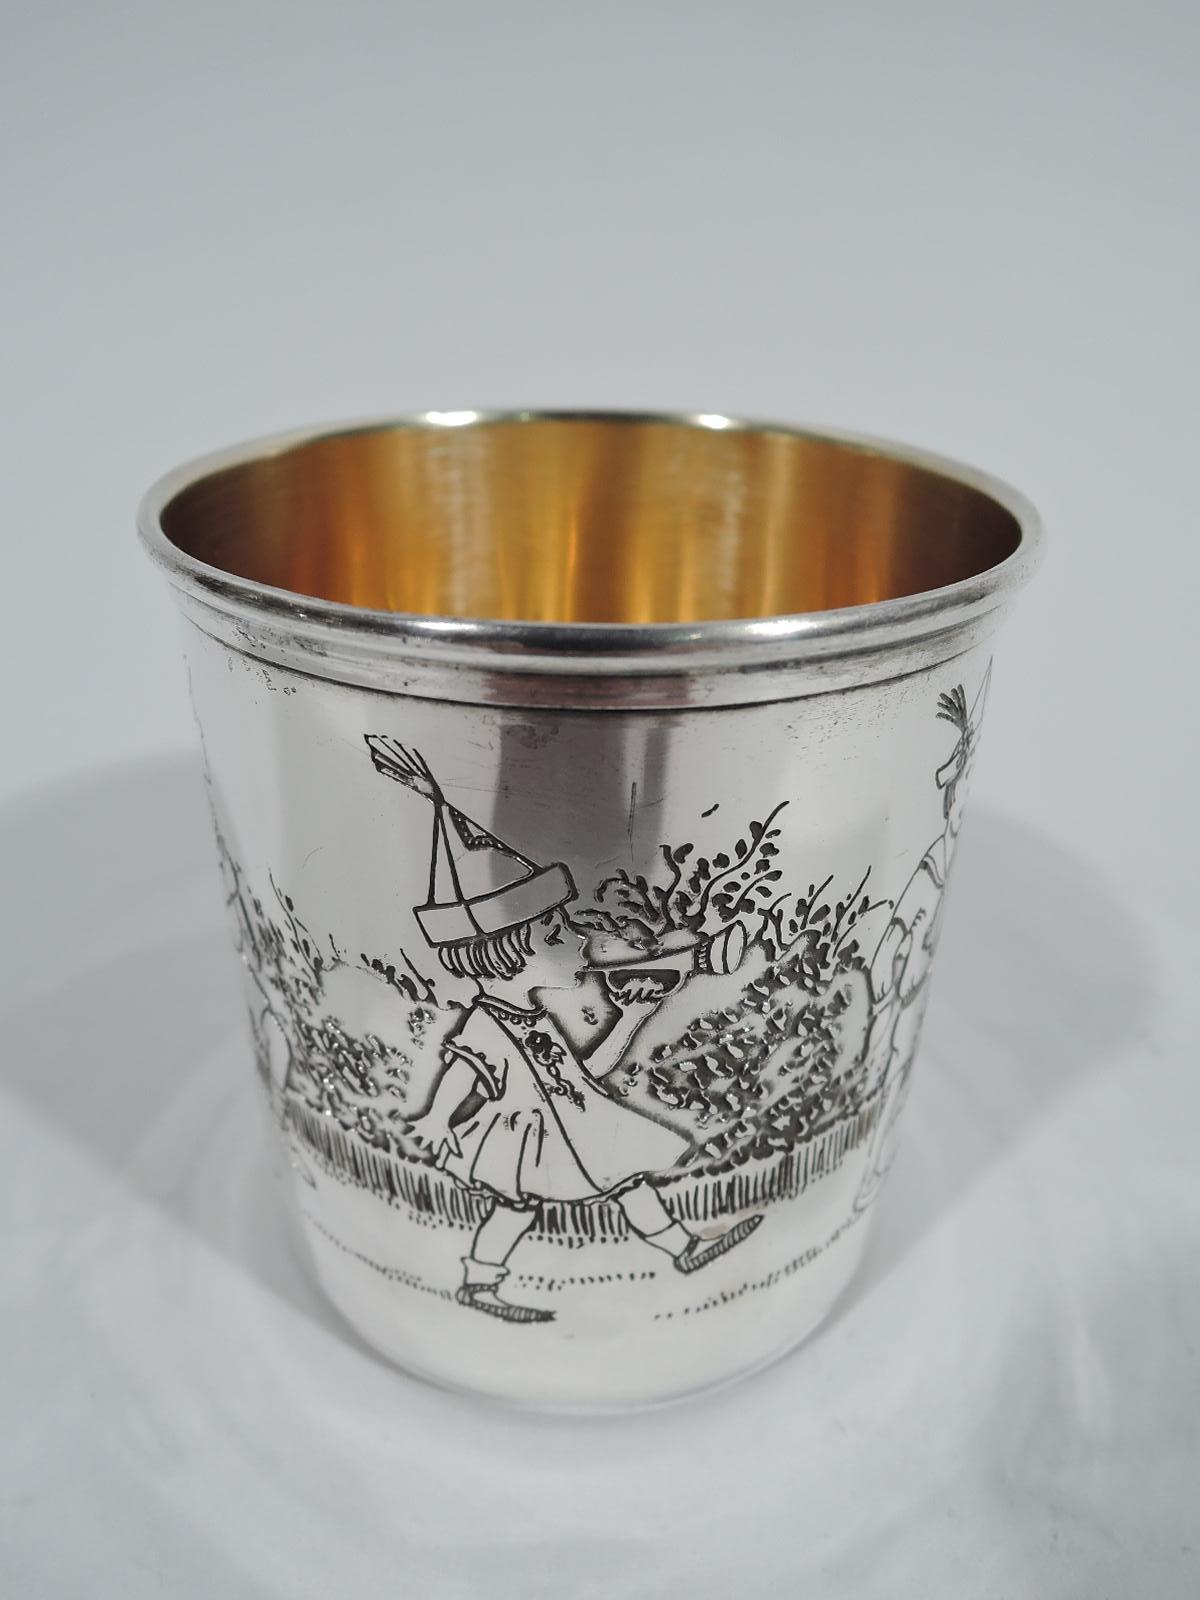 Art Deco sterling silver baby cup. Straight sides, molded rim, and C-scroll handle. Etched procession of boys and girls drumming, trumpeting, sword waving, and flag flying. A sweet piece with patriotic and military undertones. Gilt interior. Fully